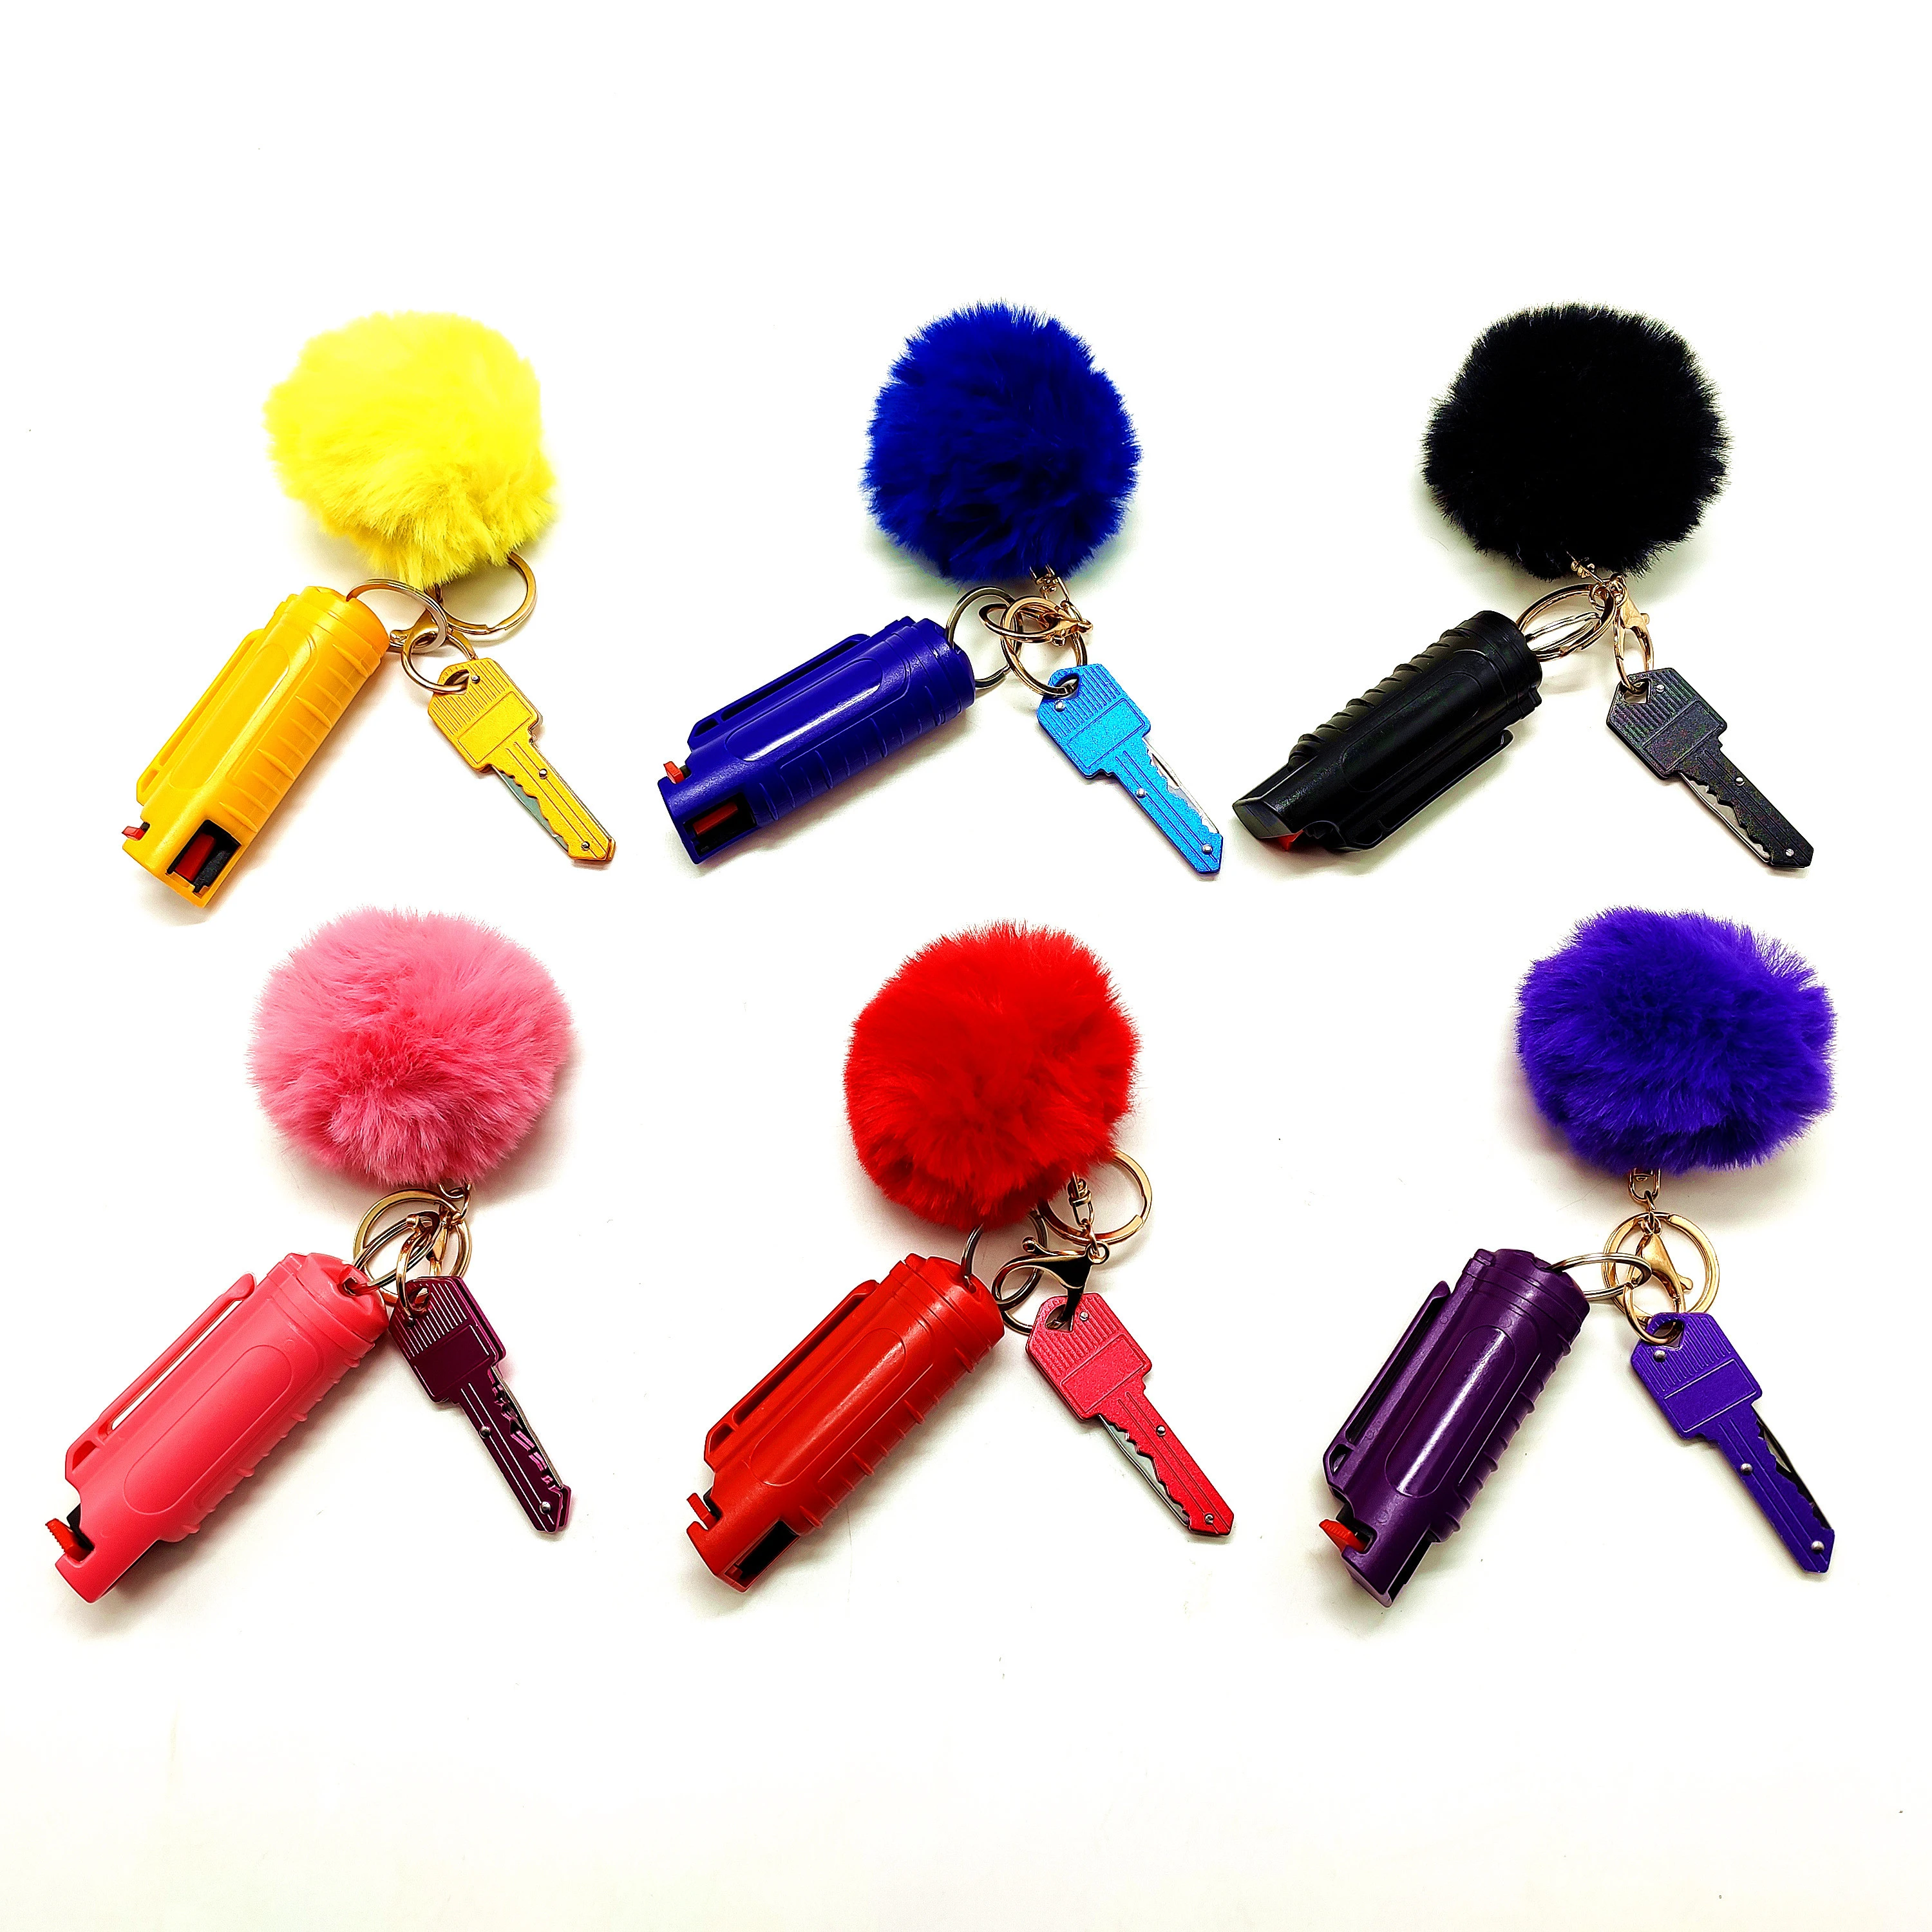 Buy Wholesale Bulk Girly Lipstick Type Glitter Pink And Black Pepper Spray  Keychain Ring Self Defense Holder Case Launcher System from Jinhua Ai Kou  Protective Equipment Co., Ltd., China